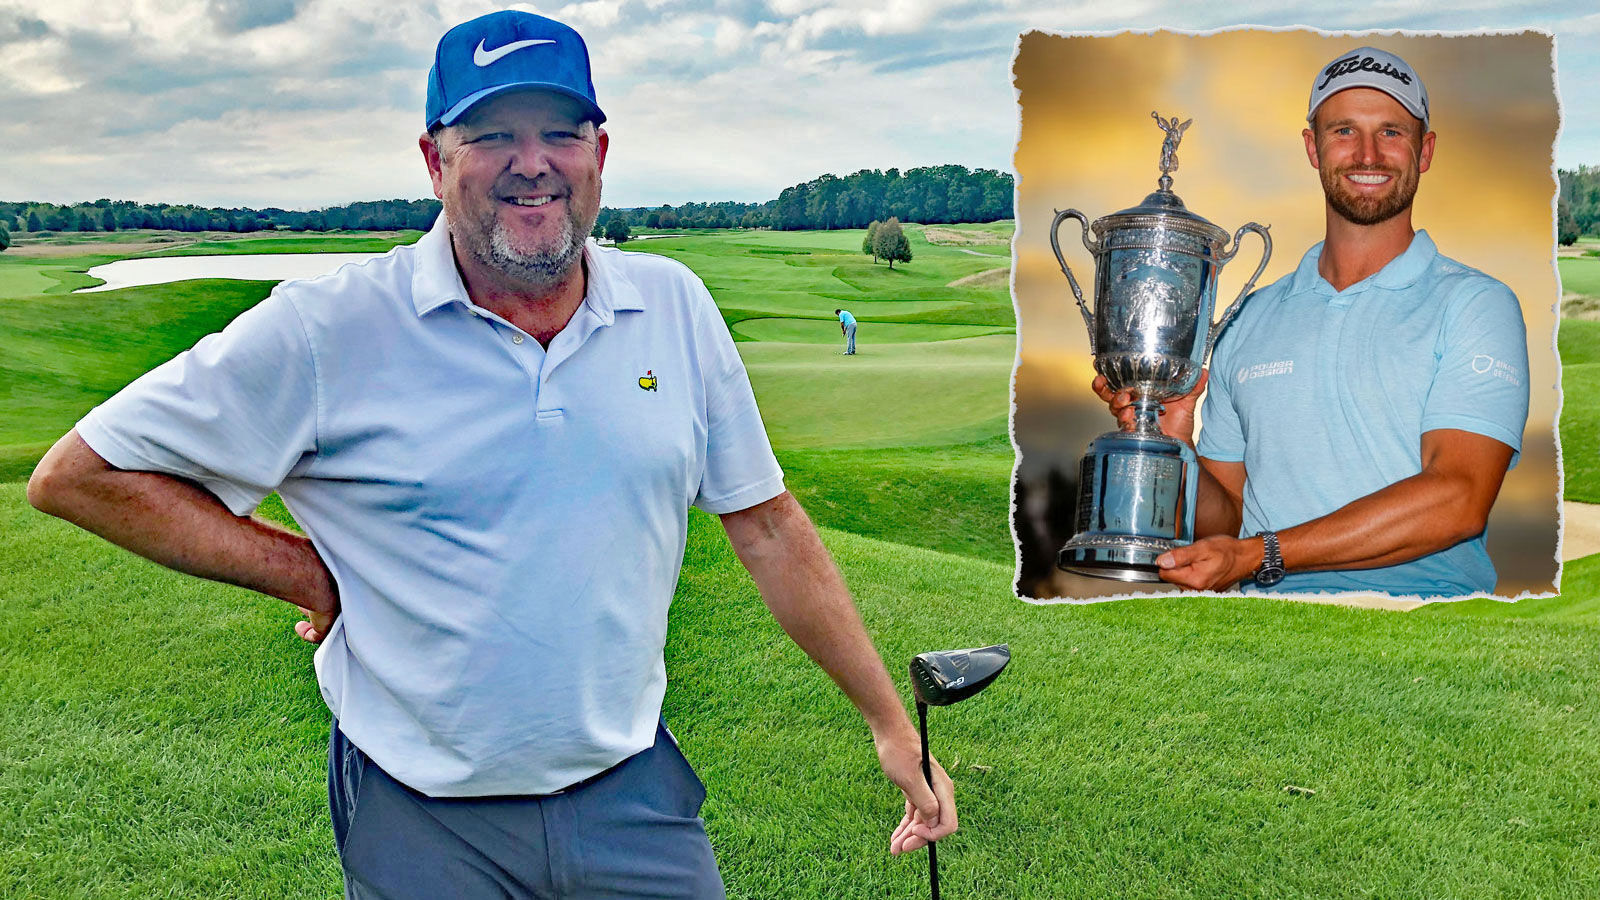 His mentoring set Wyndham Clark on a path to U.S. Open glory. At the